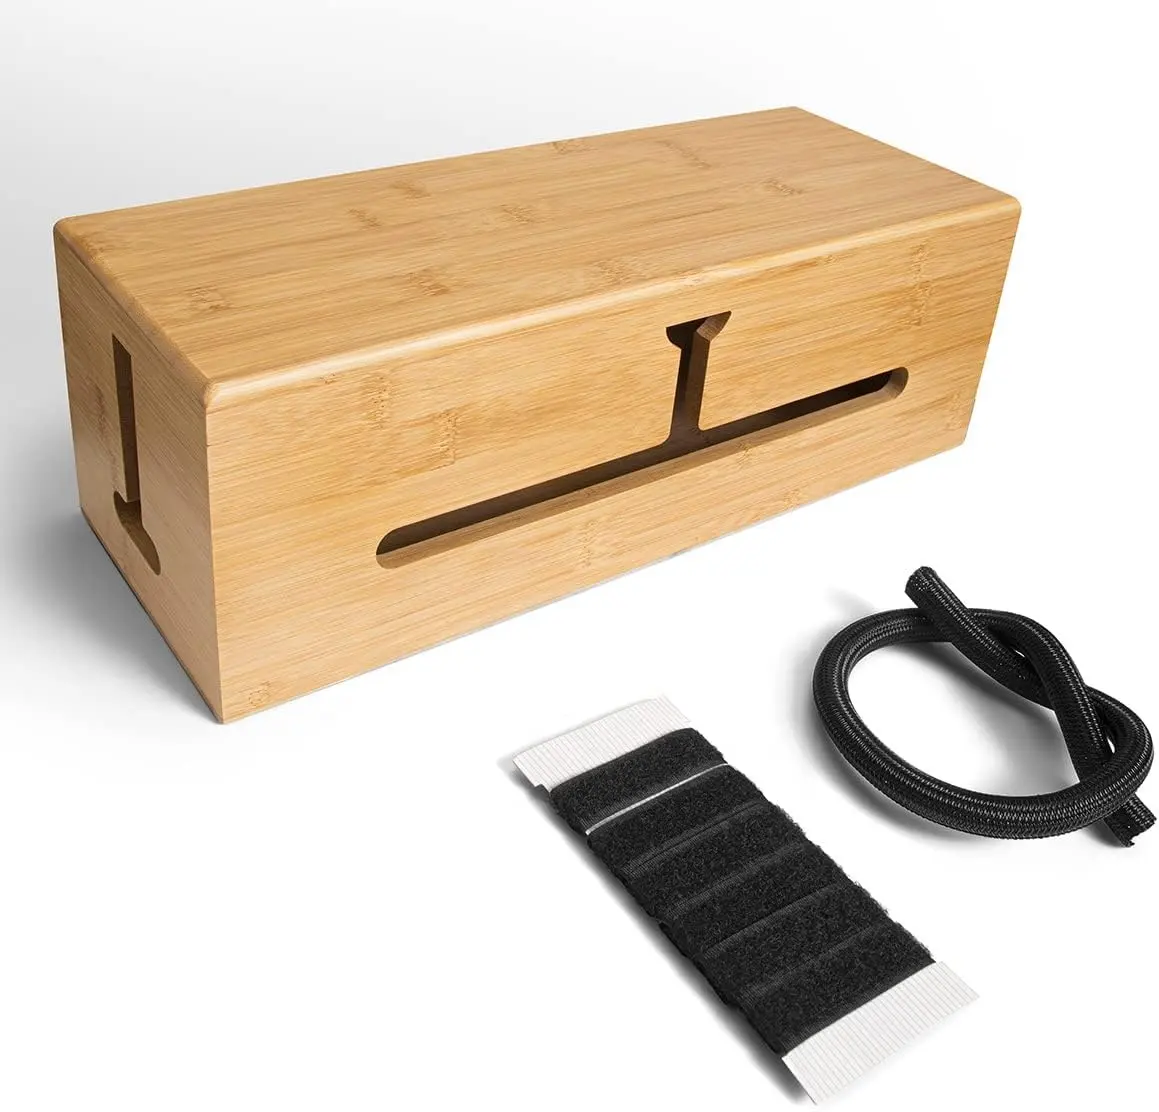 Sustainable Desk Top Wooden Bamboo Wire Cable Management Box Organizers With Extension Cord Cover & Socket